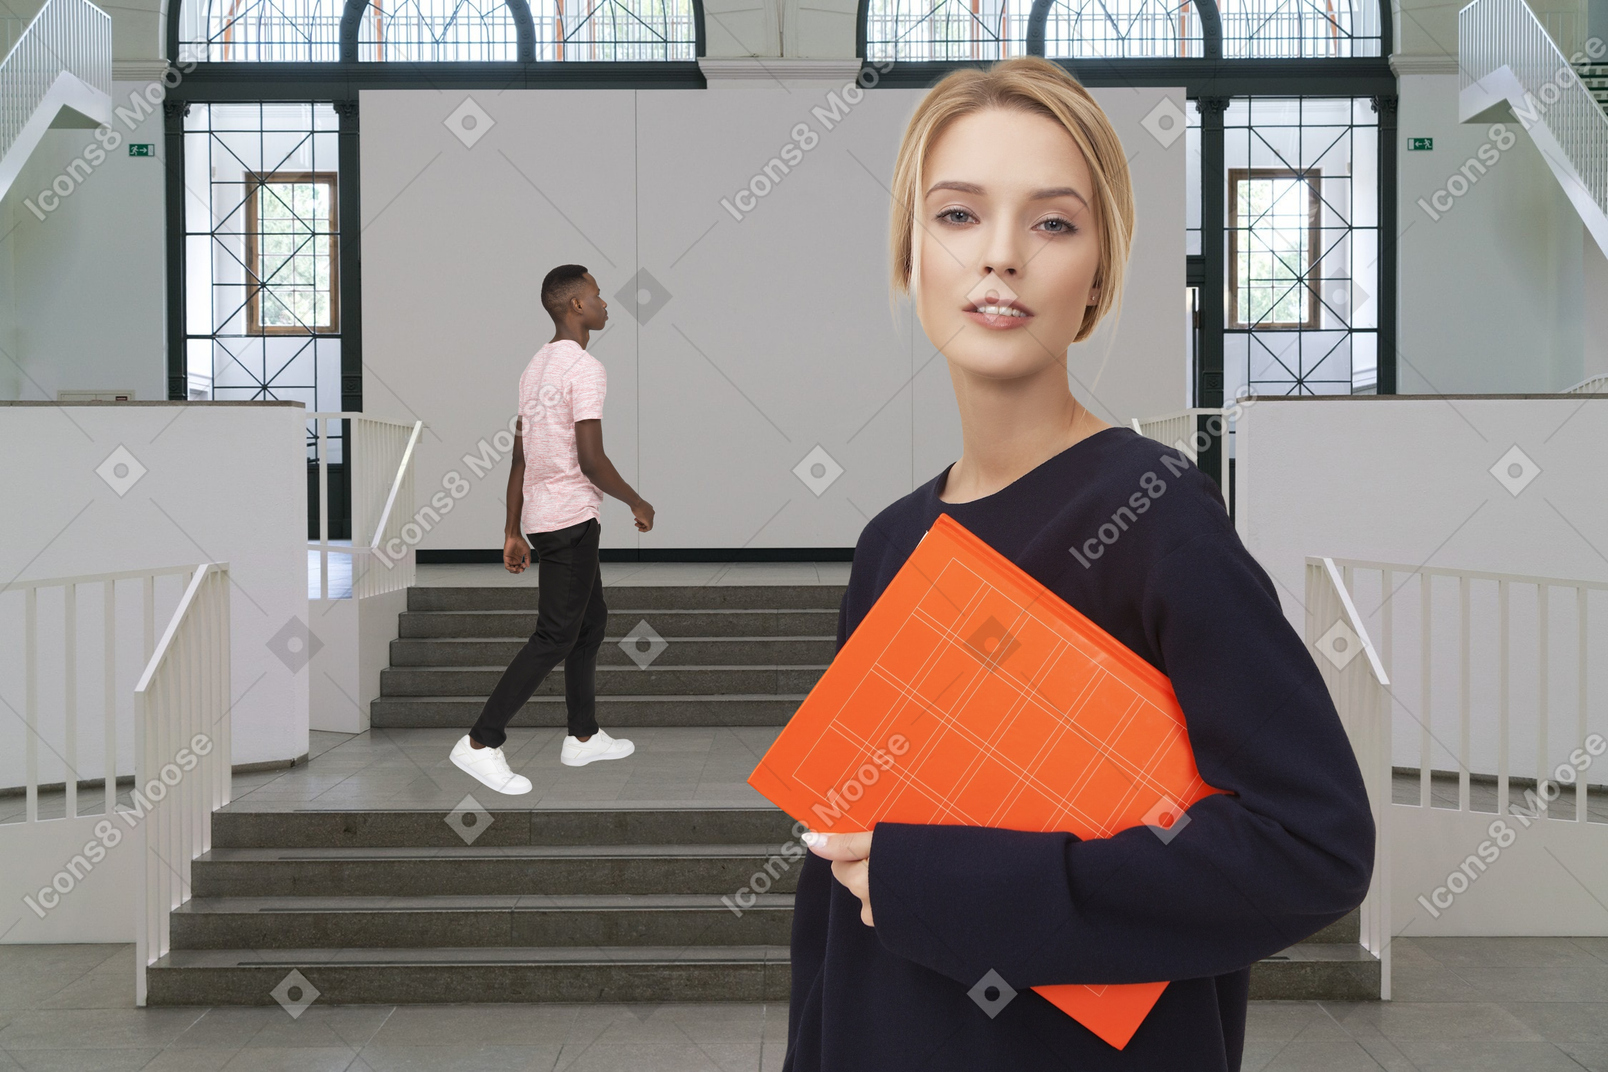 A woman holding an orange folder standing in front of a staircase